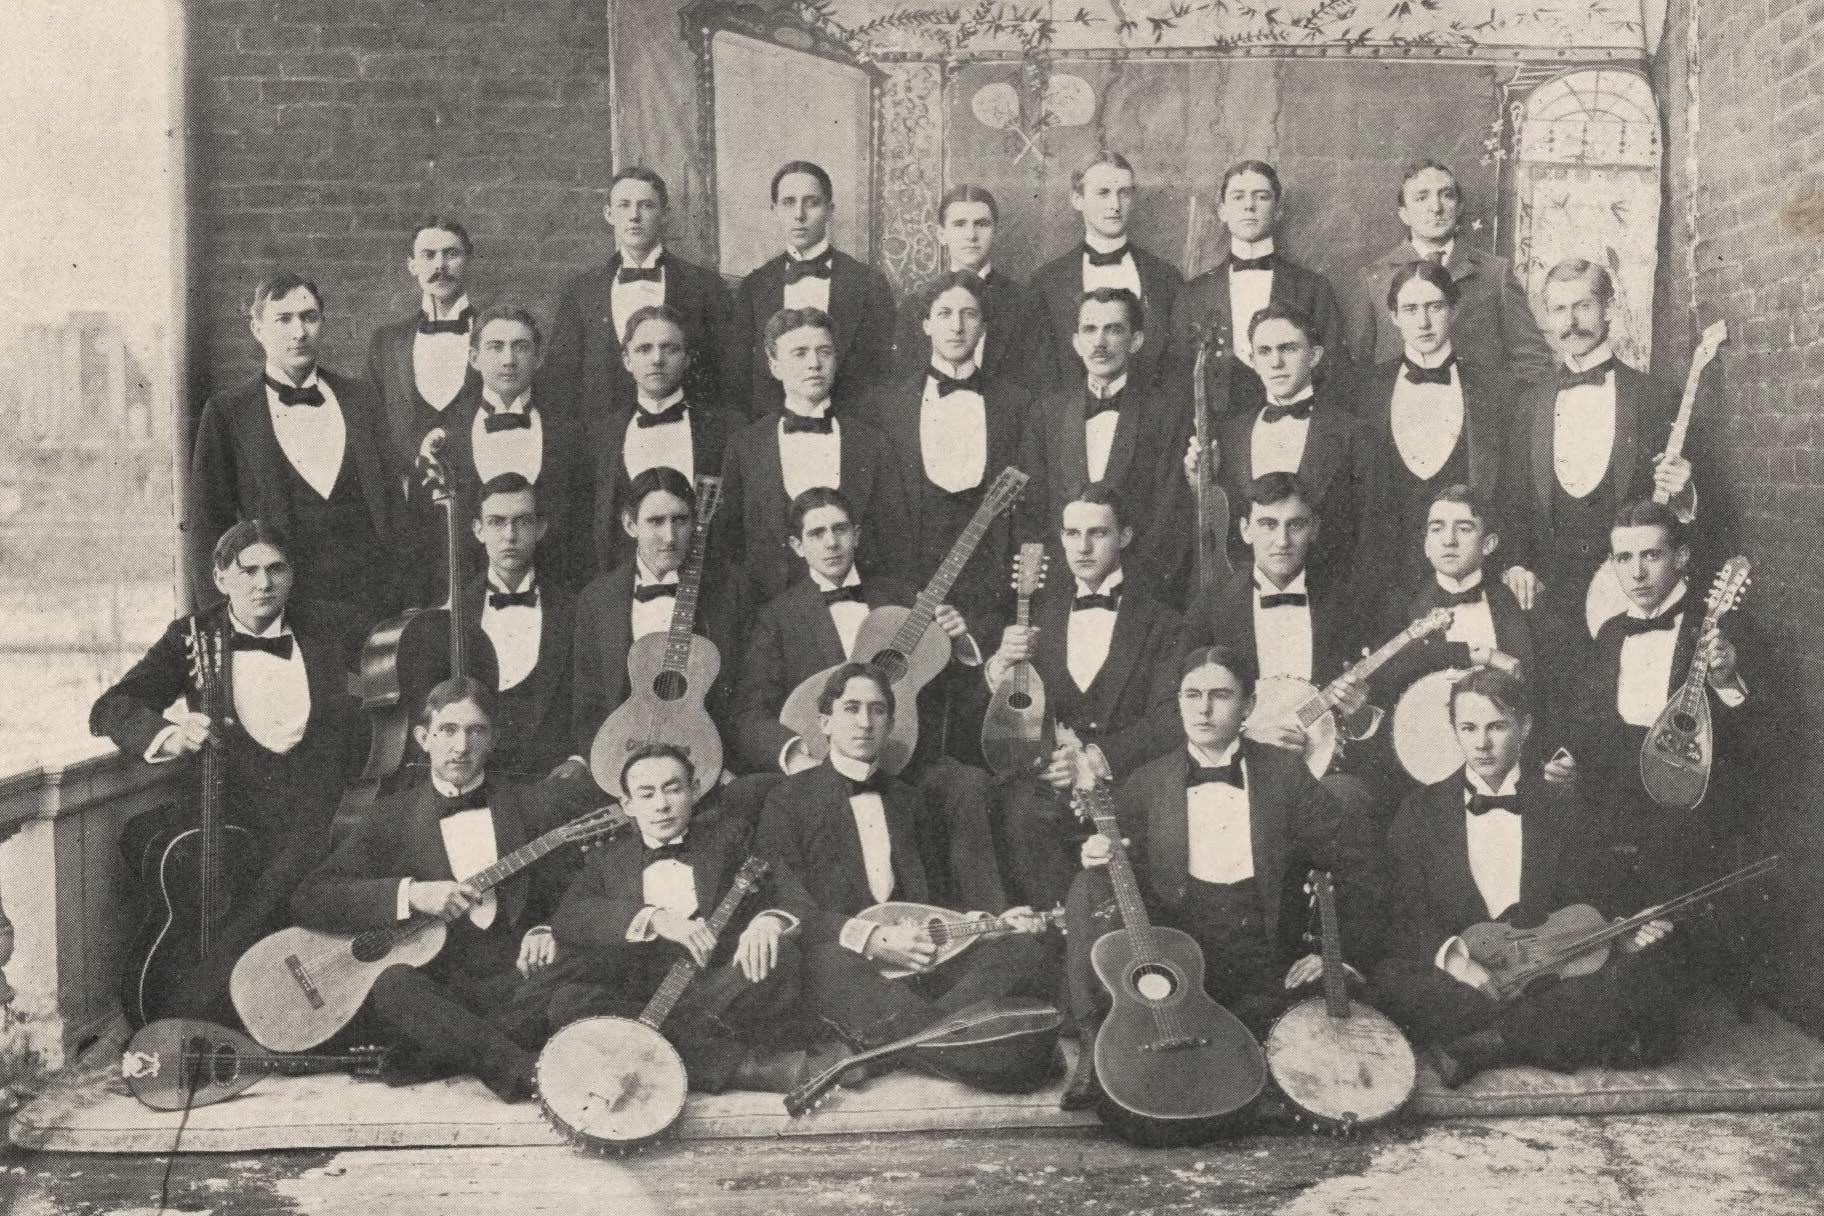 black and white image of glee club in 1896